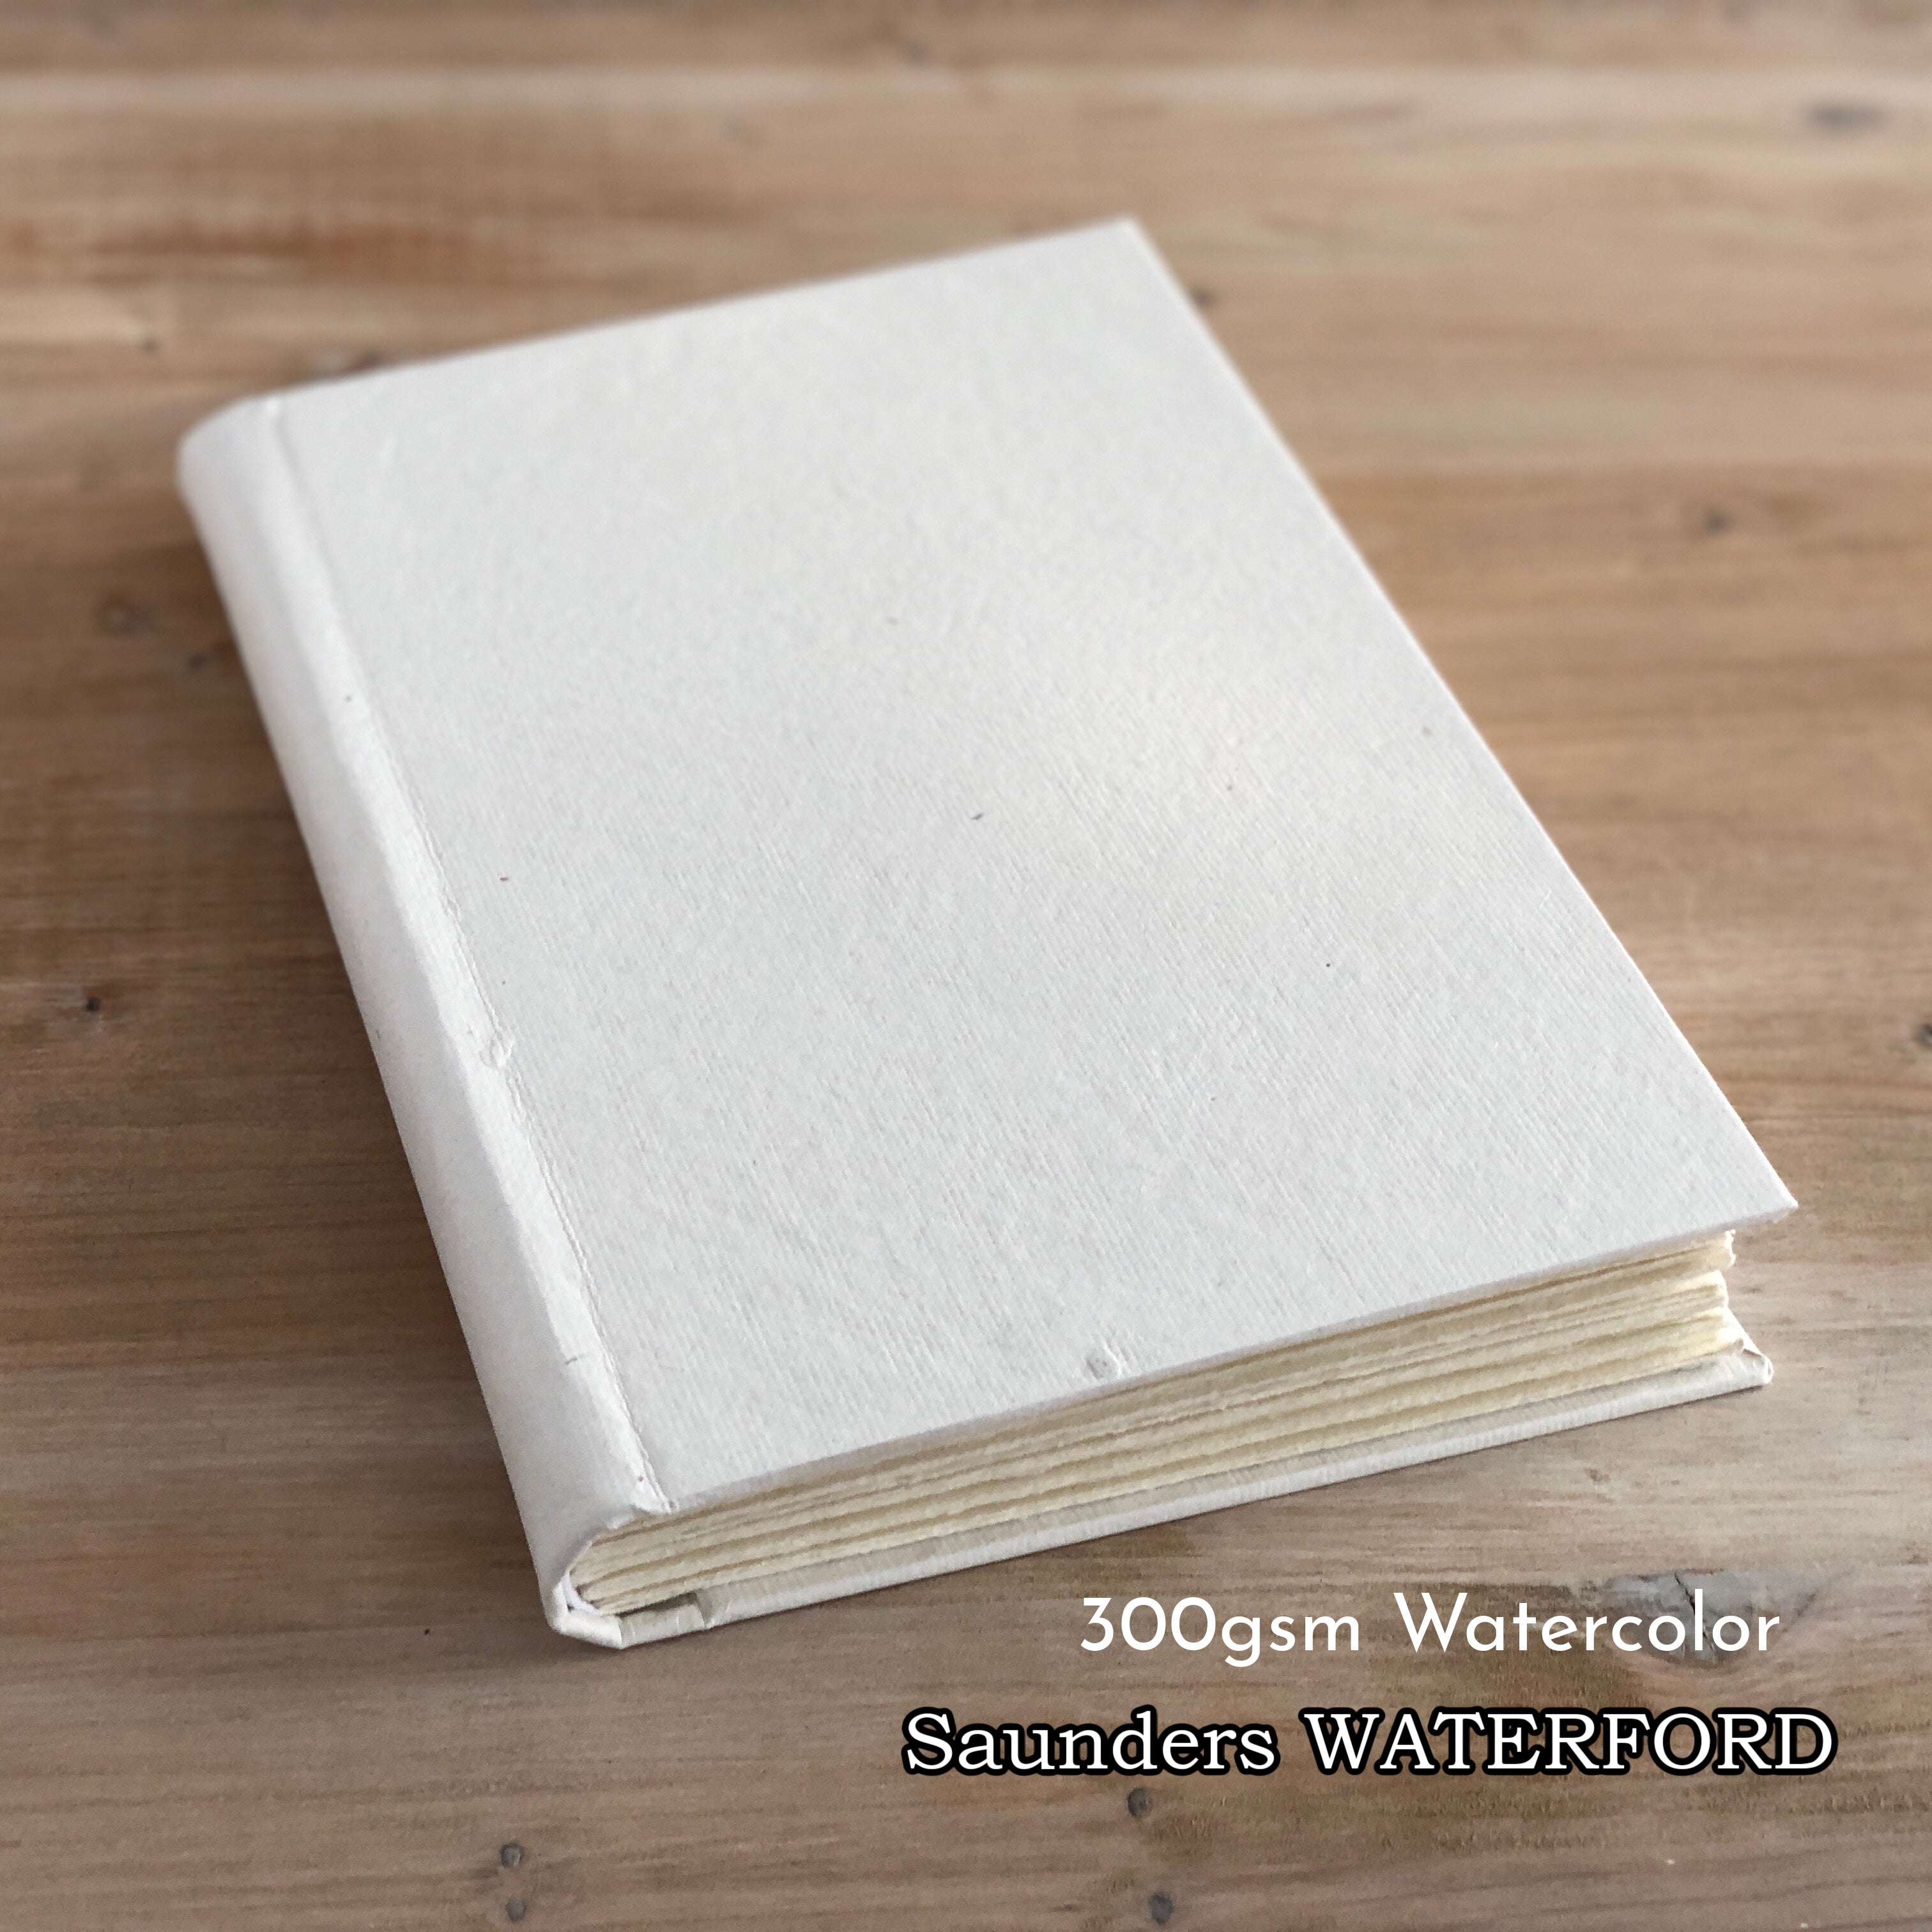 18) Saunders Waterford Paper 640gms/300lb NOT Traditional White 76x56cm /  22x30 - Art Supplies materials and equipment